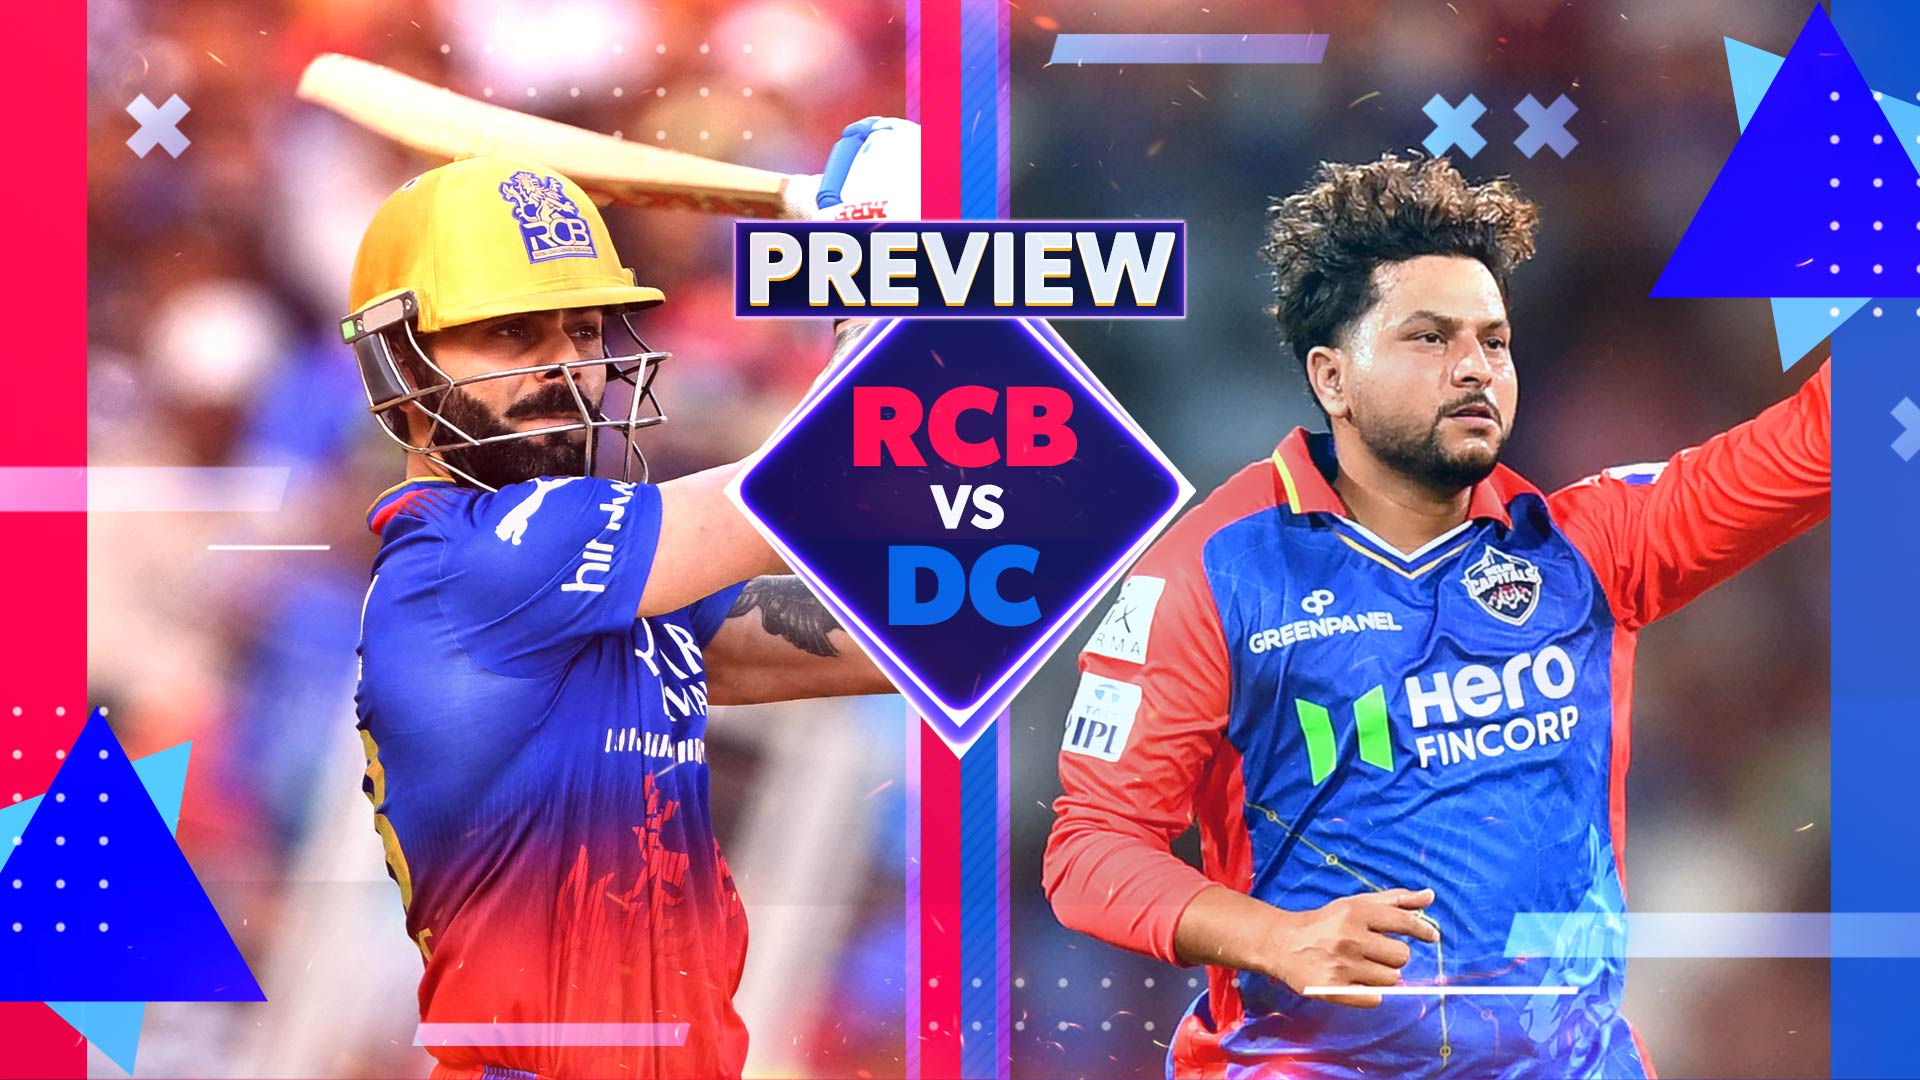 RCB vs DC: All You Need to Know